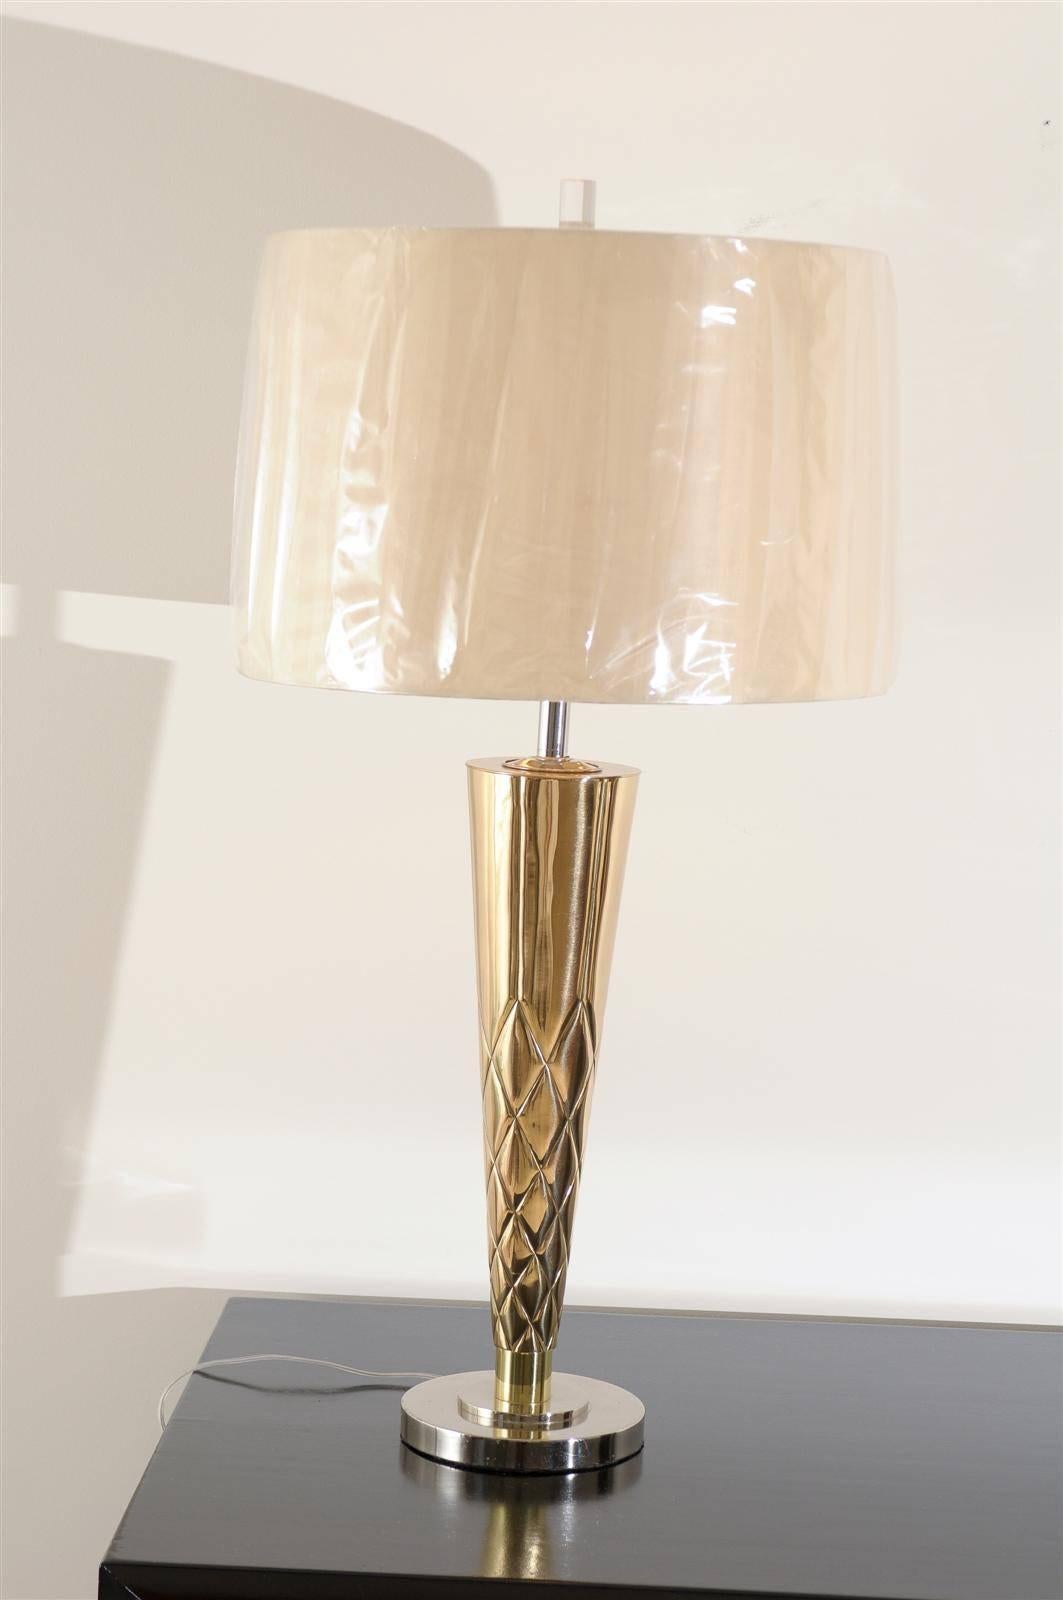 A stunning pair of large-scale vintage Tornado style lamps, circa 1960. Solid bronze sculpture finished in brass, on a nickel base and nickel accents. Heavy, exceptionally made pieces. Sophisticated jewelry! Excellent restored condition. The